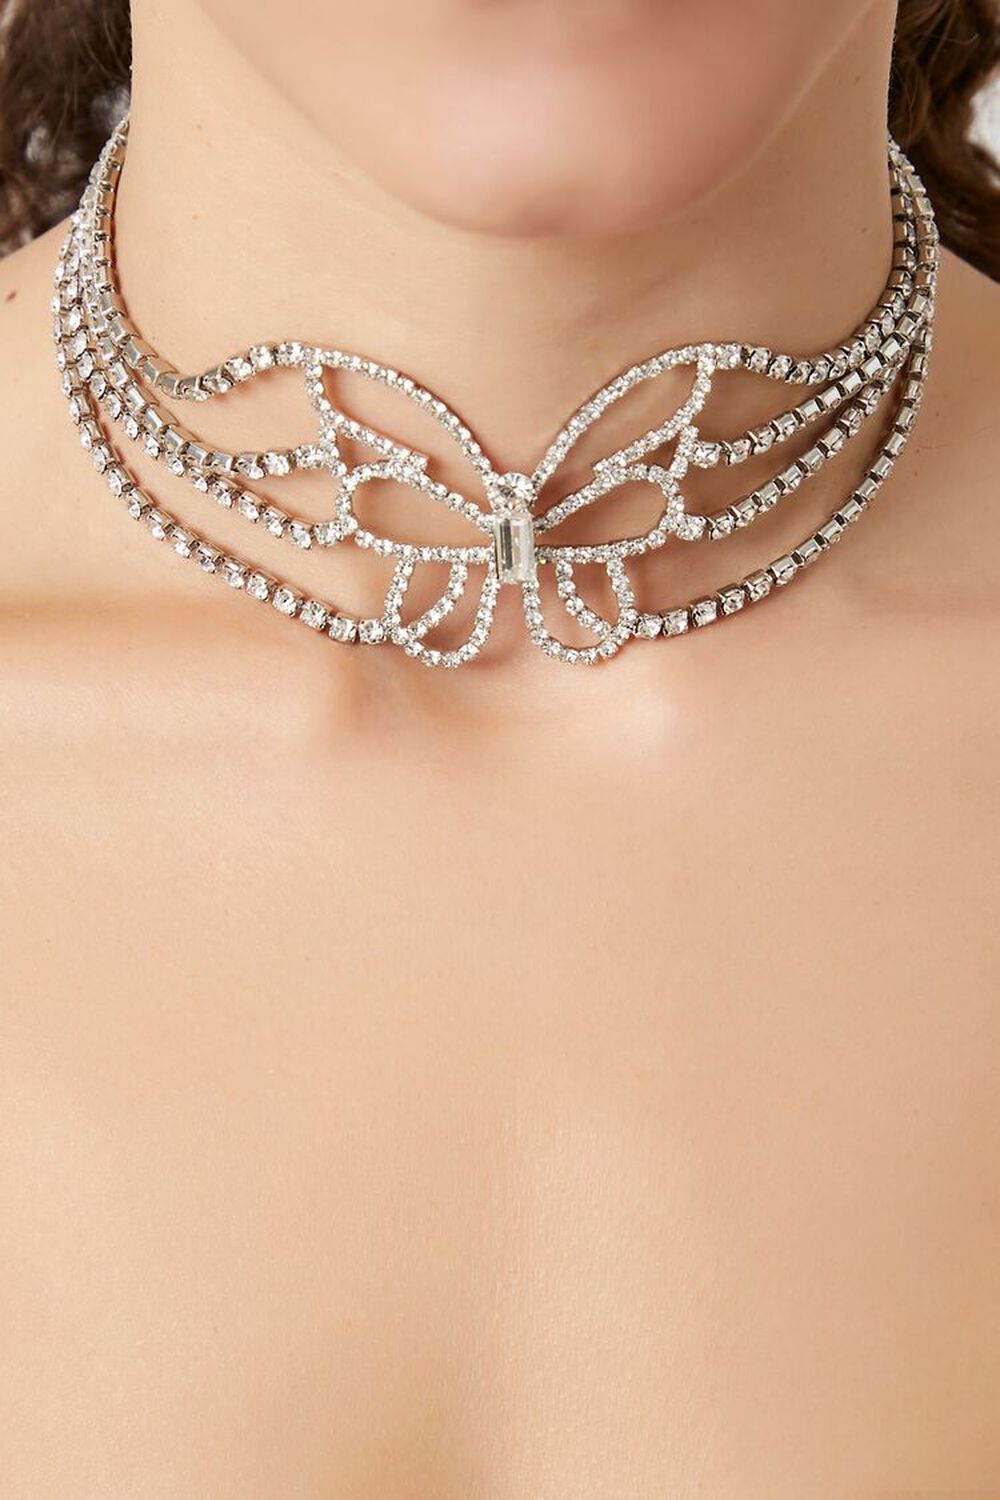 SILVER/CLEAR Rhinestone Butterfly Choker Necklace, image 2